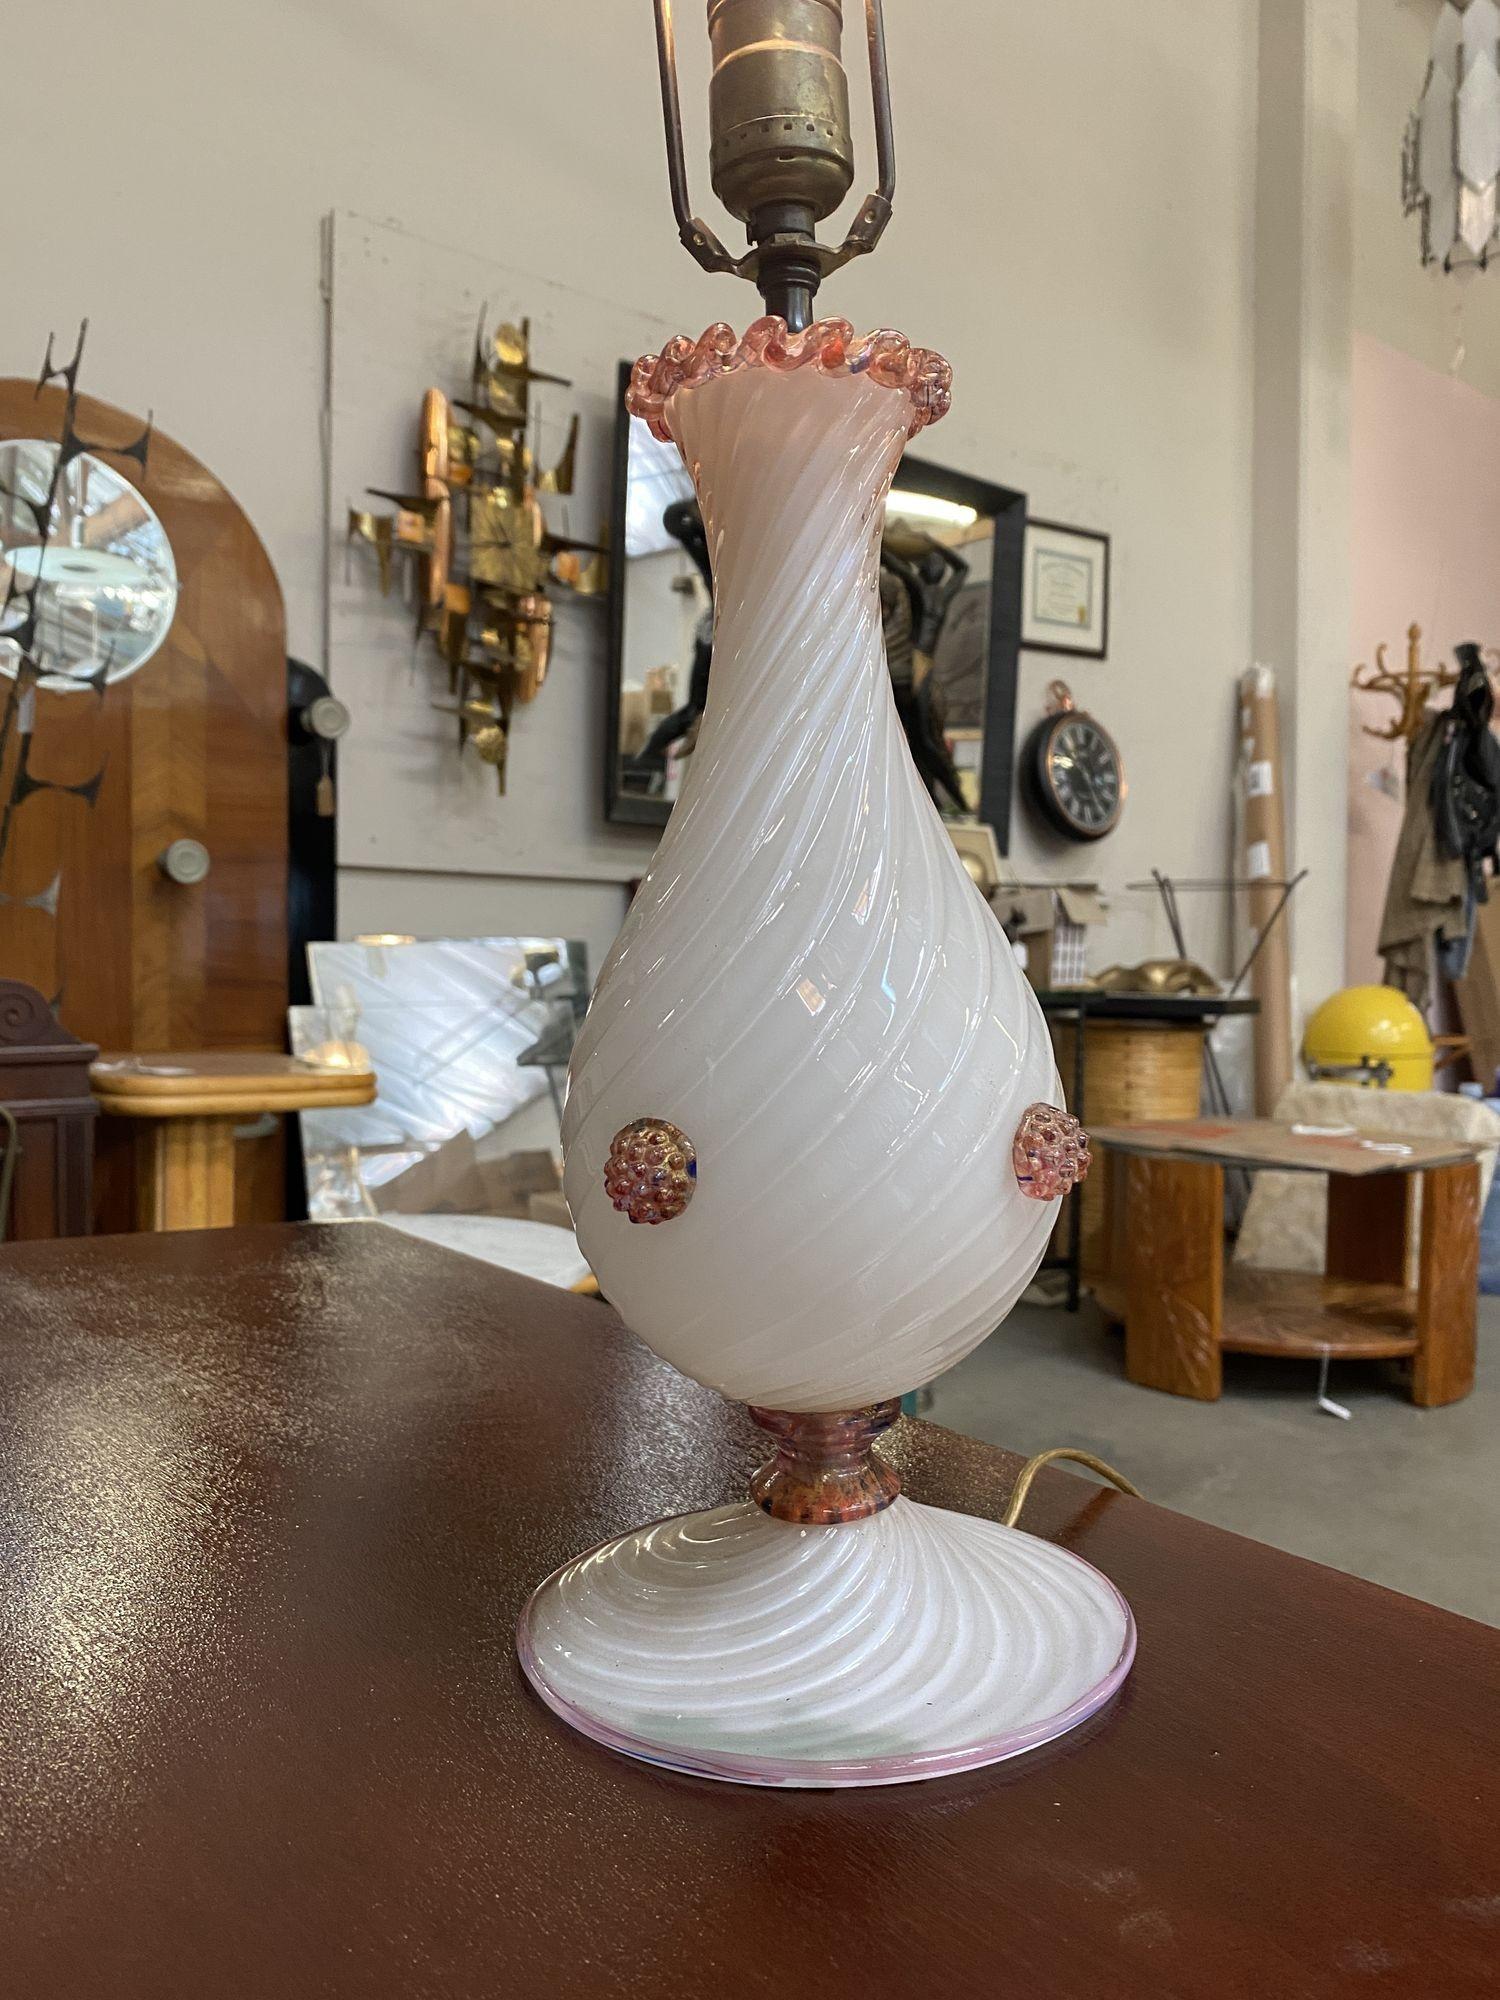 Early midcentury pink Italian twist Barovier Murano art glass table lamp featuring a semi-translucent white twist shape with pink accents in the shape of decorative lace.
1950, Italy.